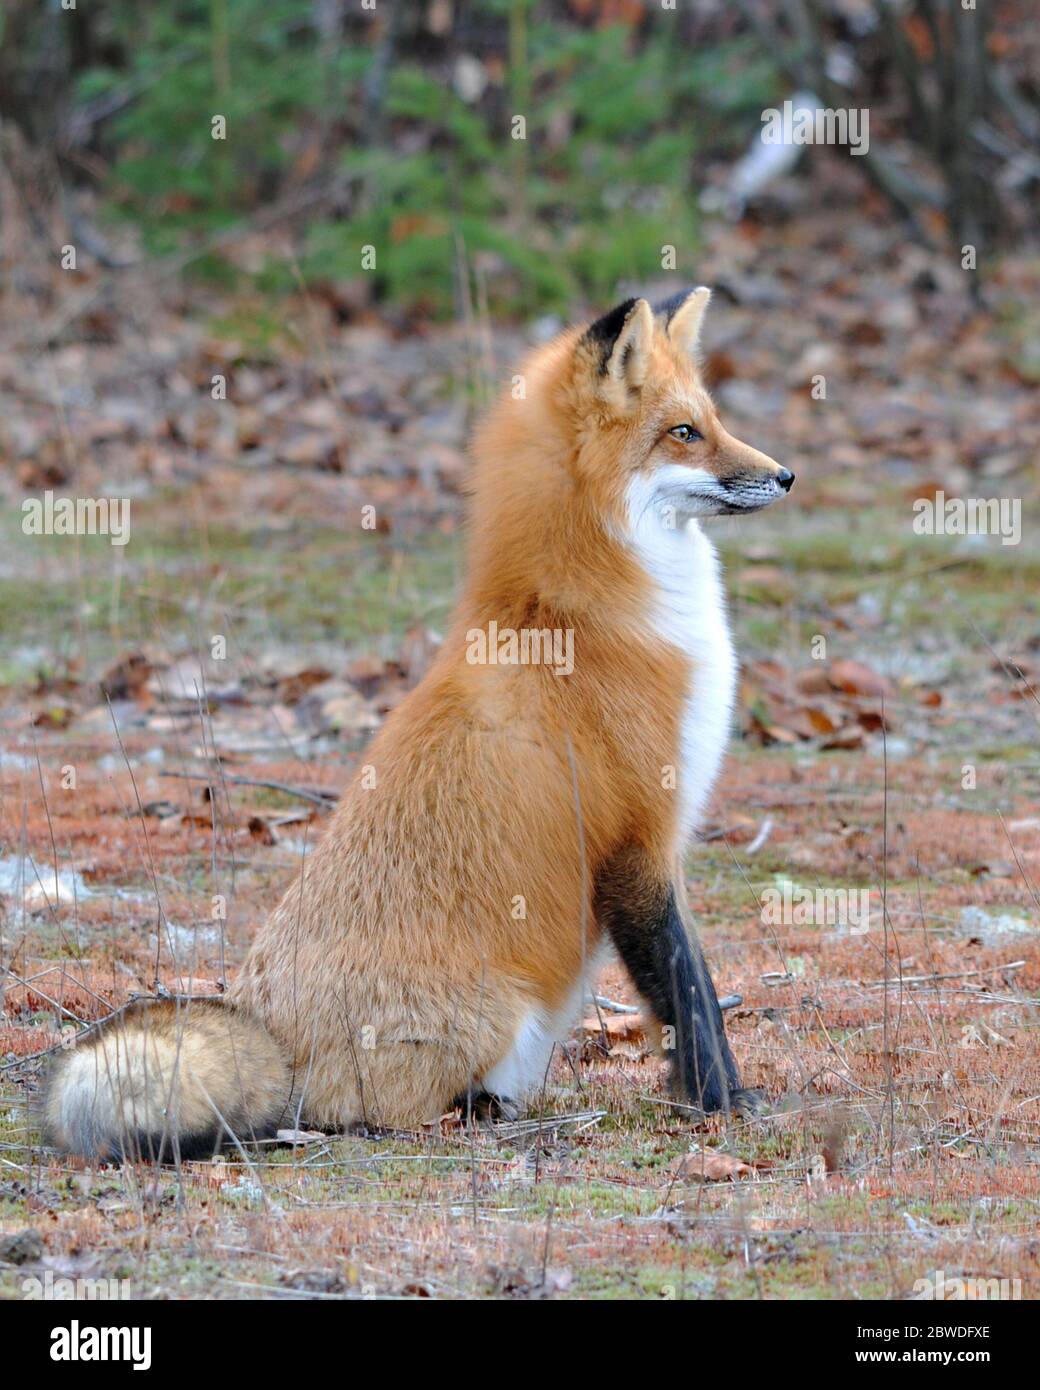 Red Fox Animal Close Up Profile Side View In The Forest With Trees